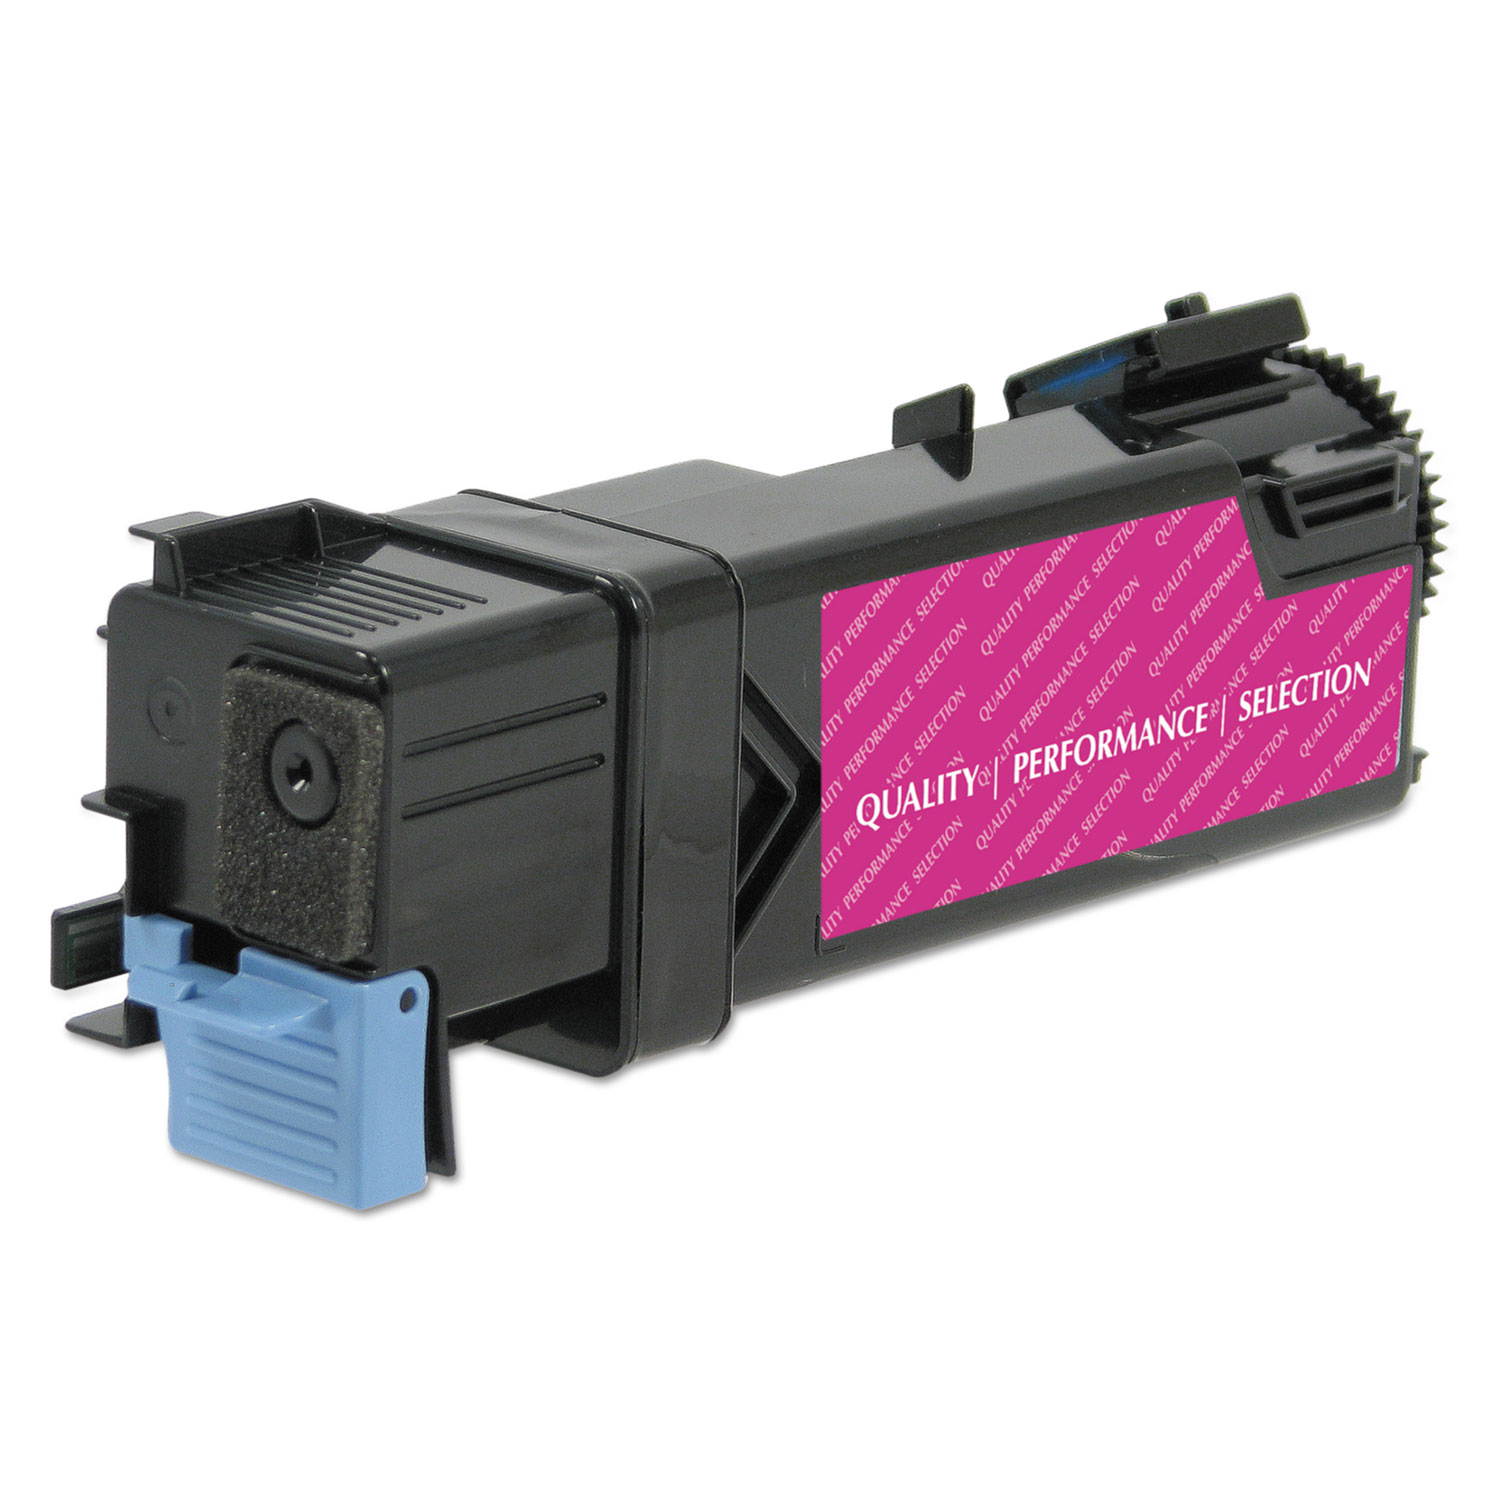 Remanufactured 331-0717 (2150) High-Yield Toner, 2500 Page-Yield, Magenta